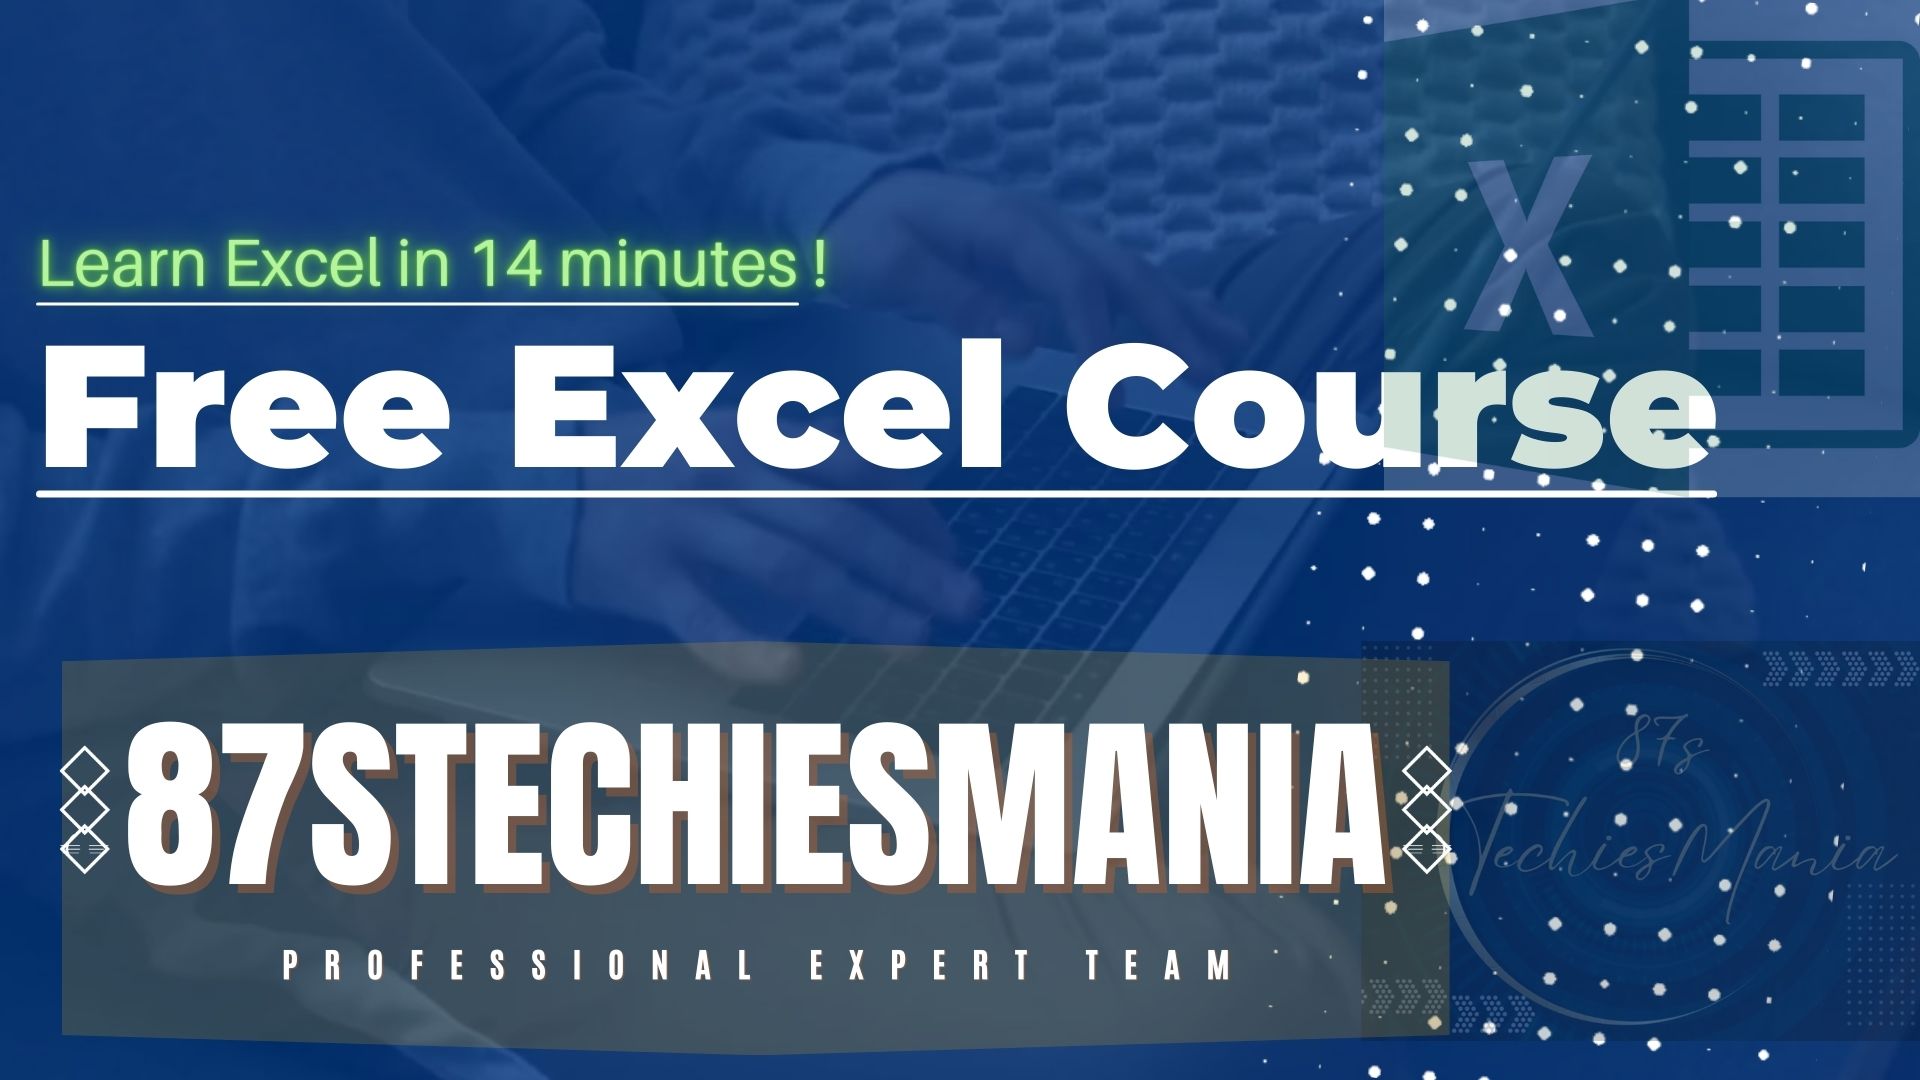 Free Excel Online Learning Guide in Just few minutes